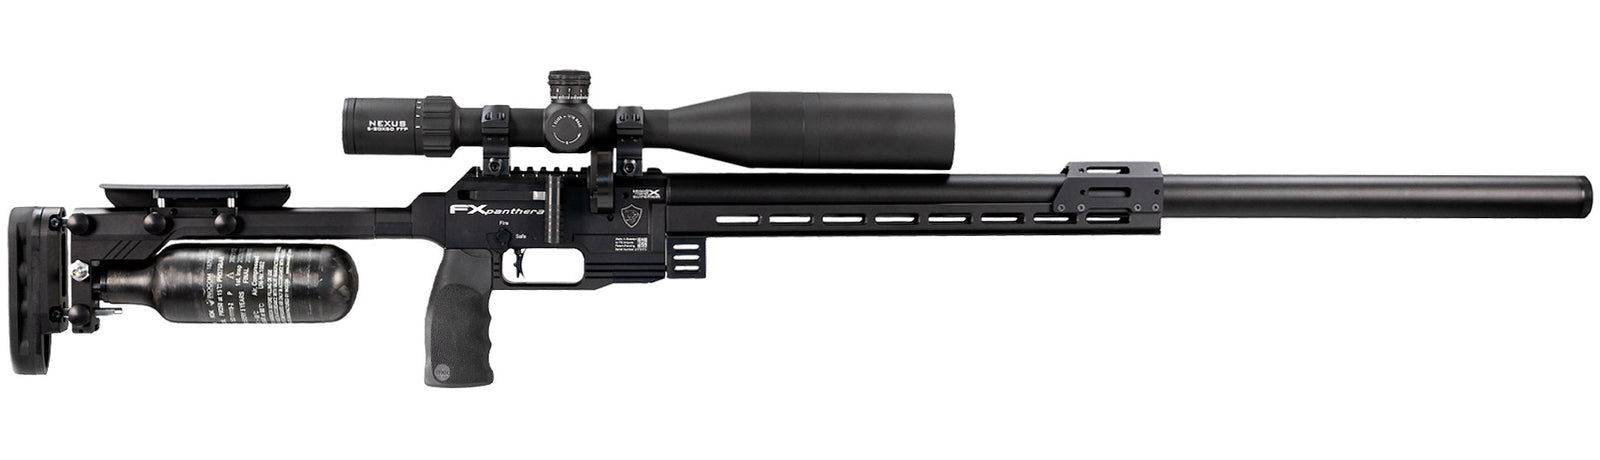 FX AIRGUNS - PANTHERA EXP 700 - IN STORE NOW